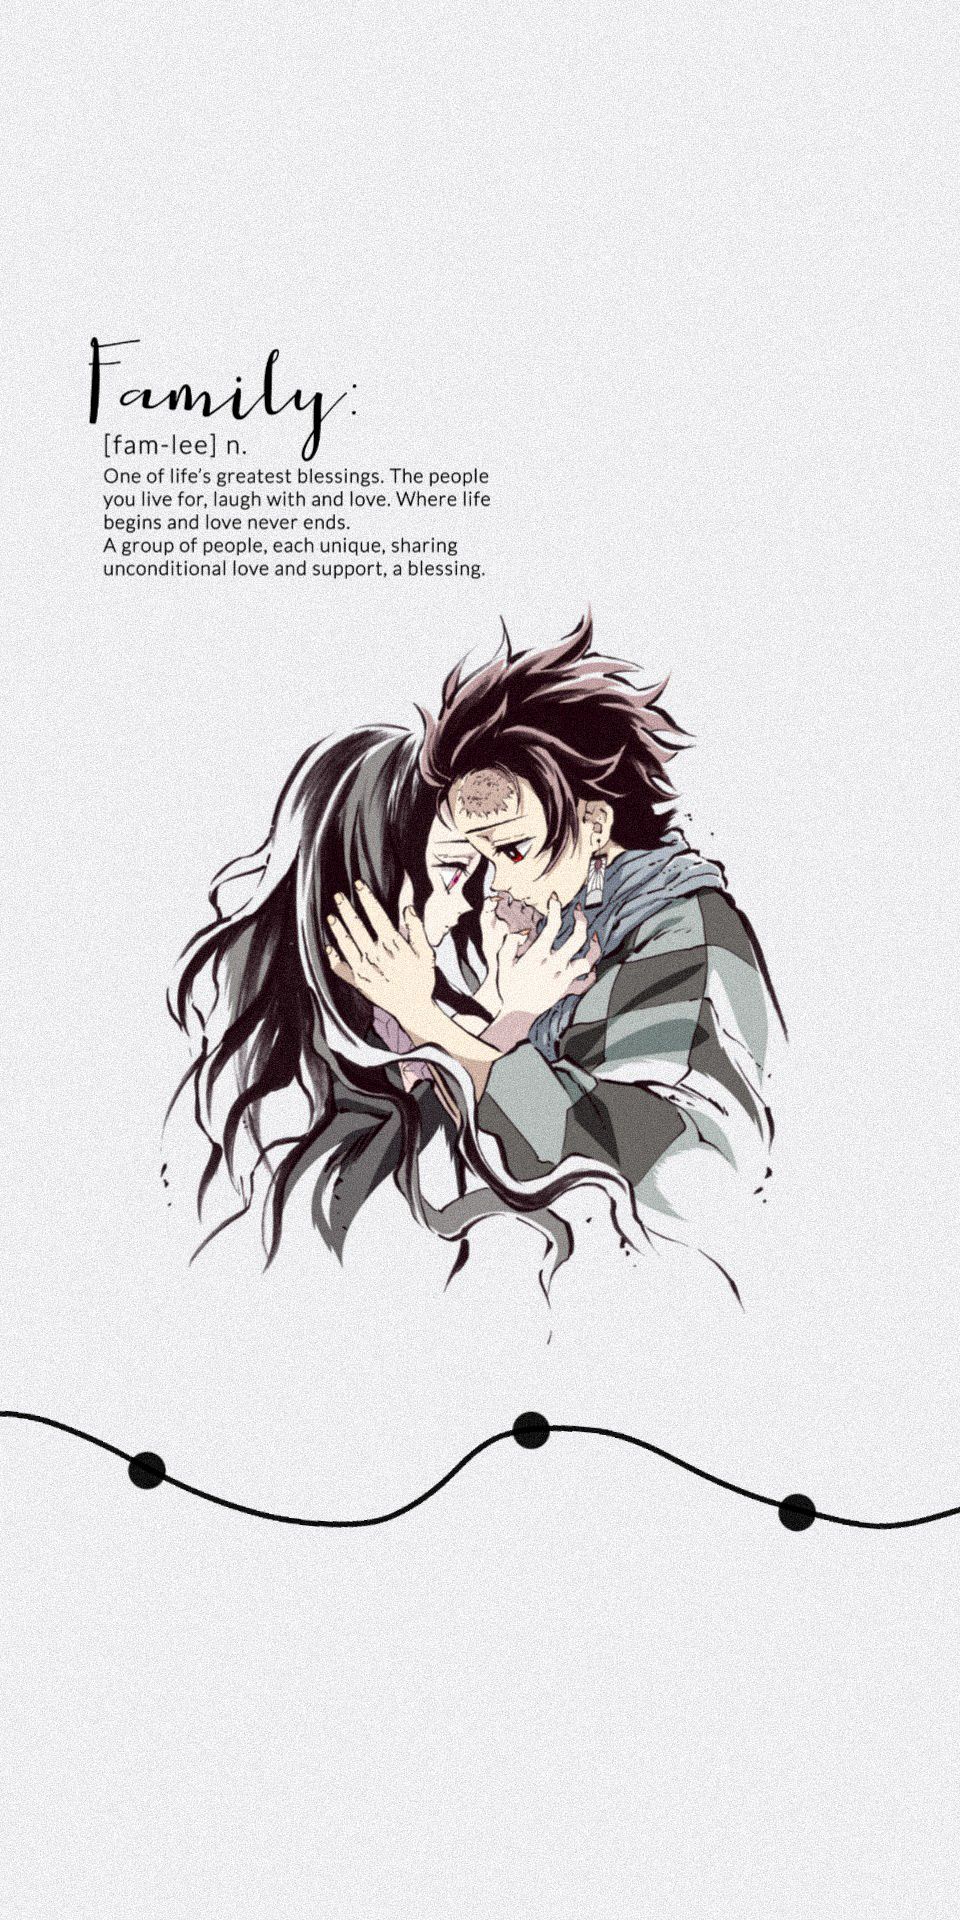 A drawing of two people kissing with the word family written above it - Demon Slayer